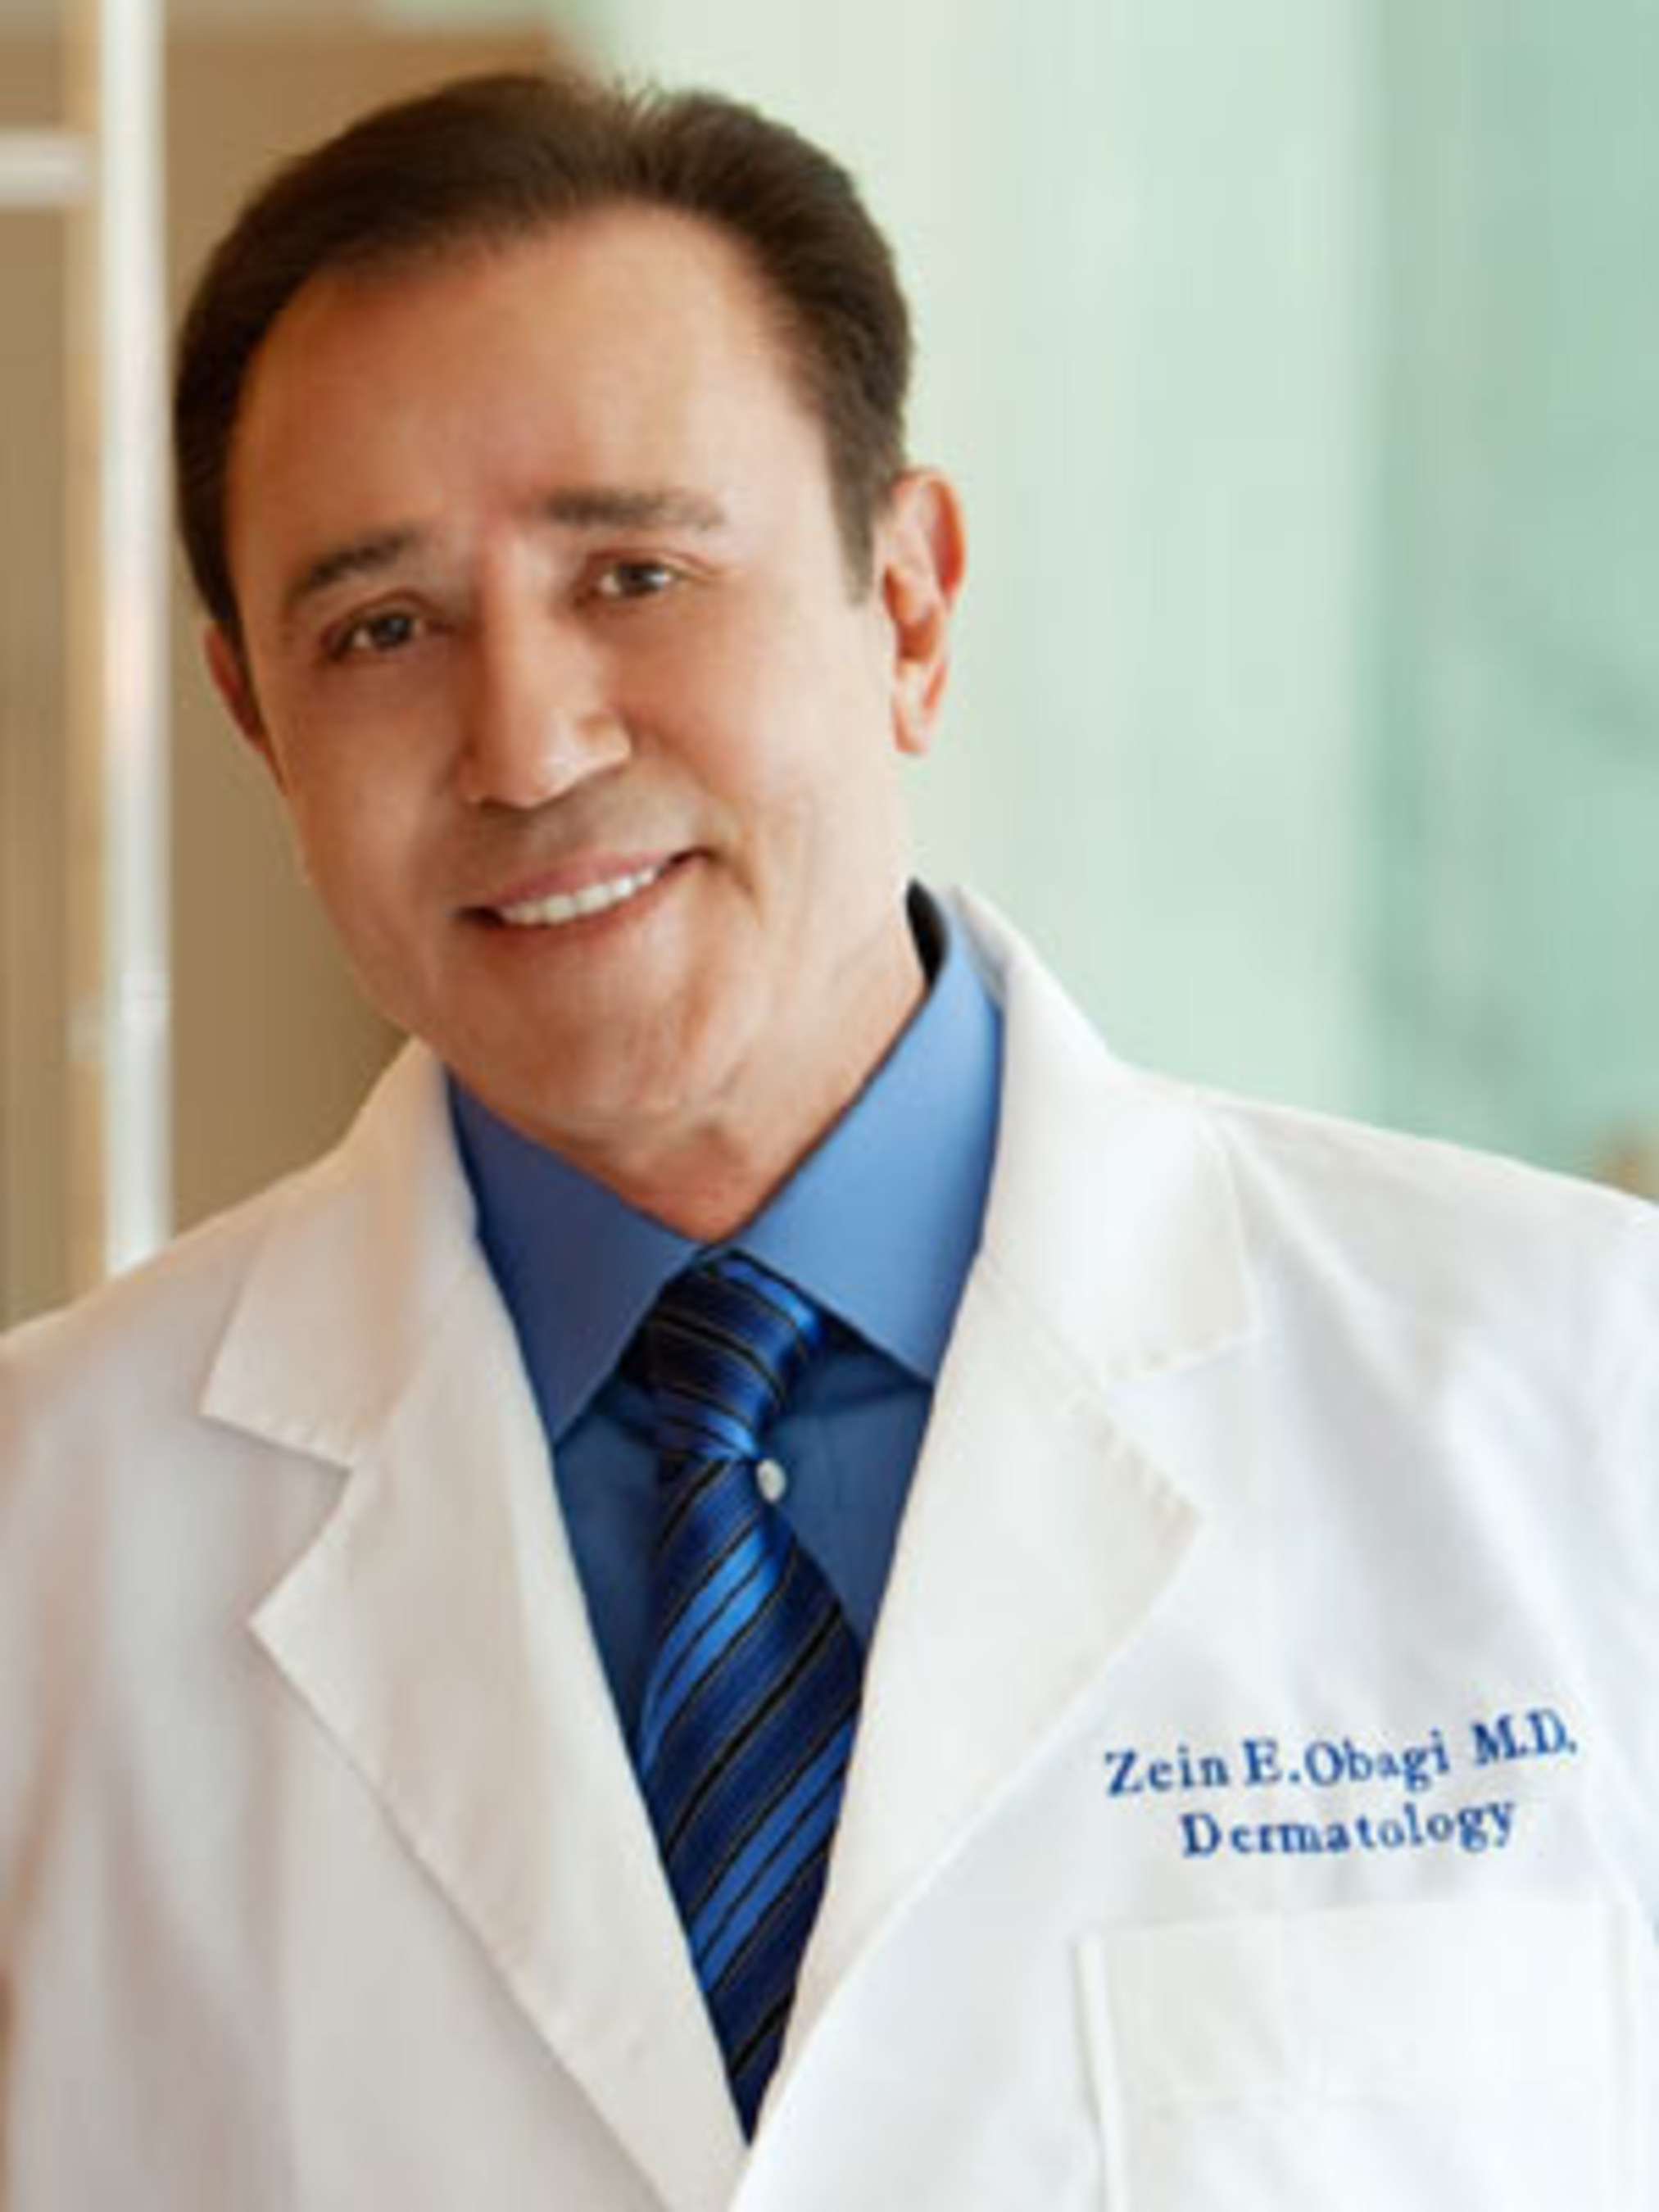 New book by legendary dermatologist Dr. Zein Obagi teaches the science of skin health